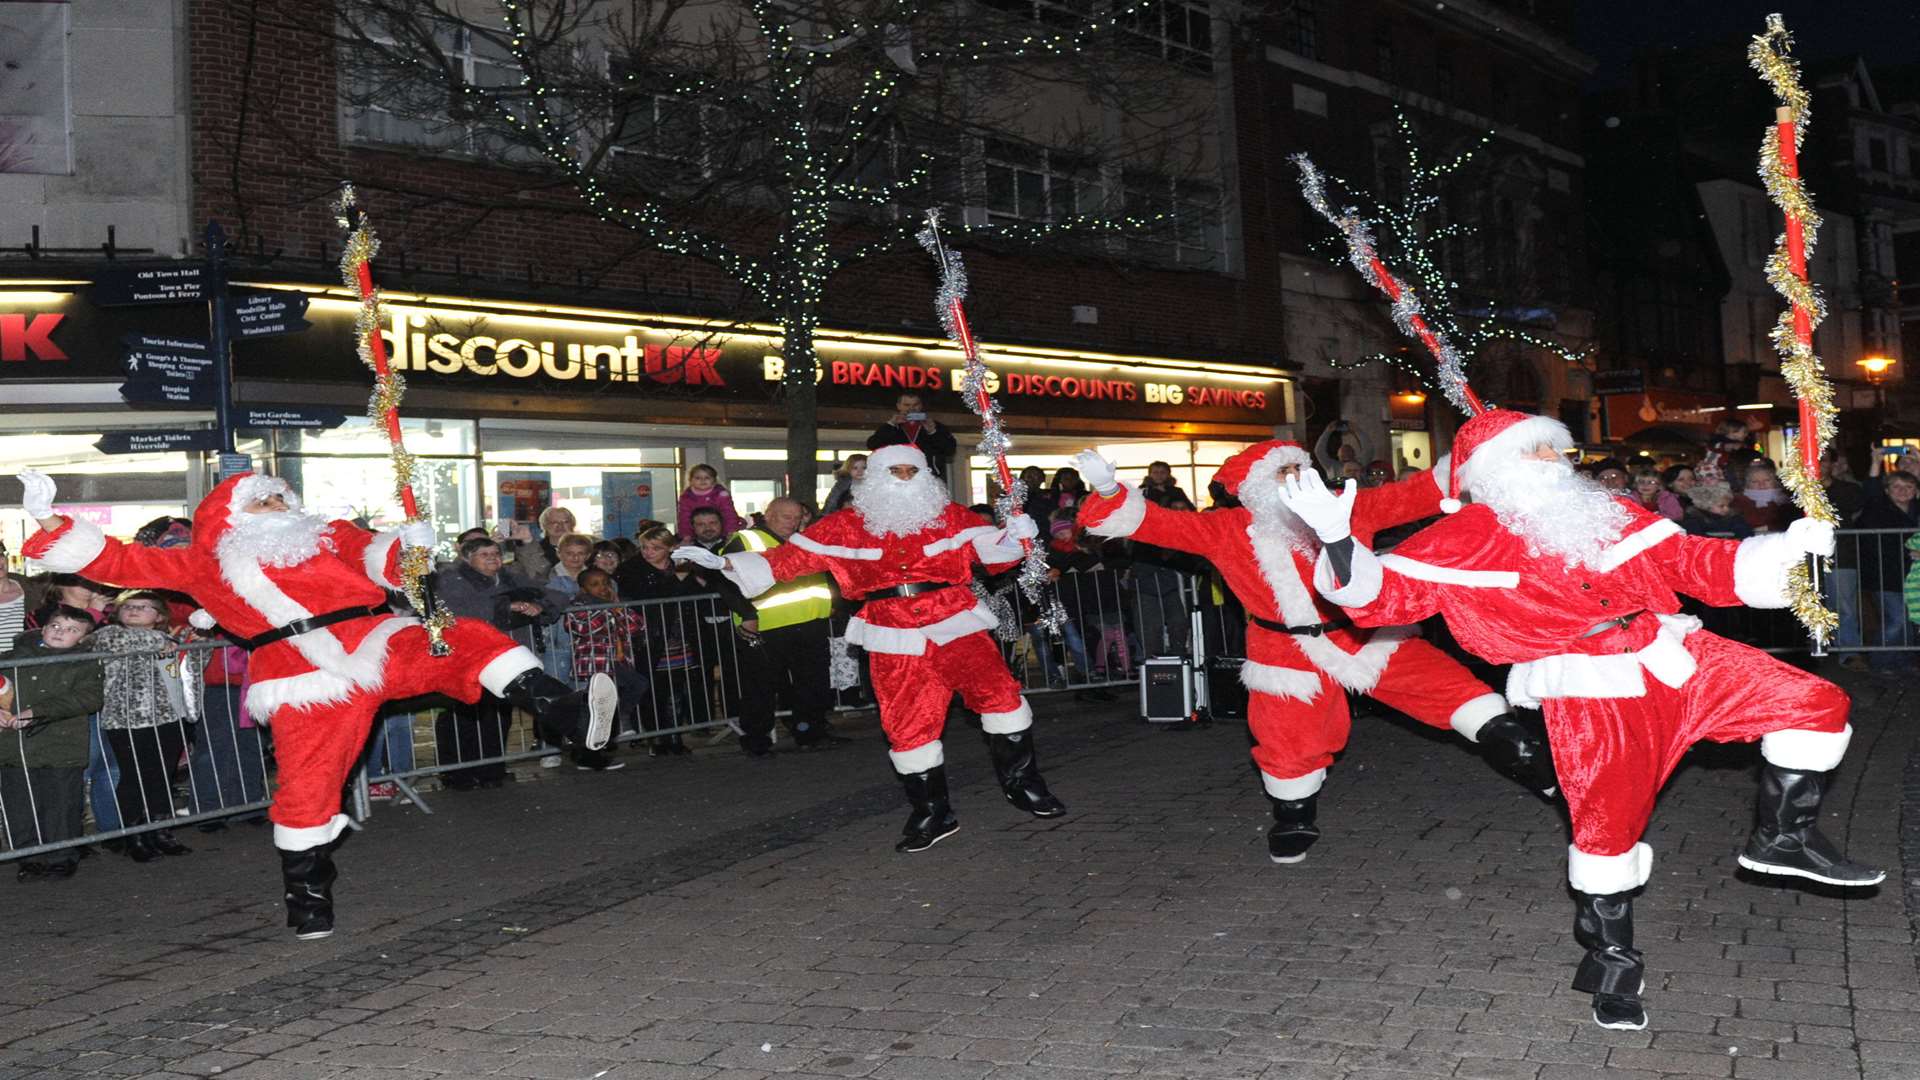 More than one Santa Claus will be coming to town and dancing in the streets